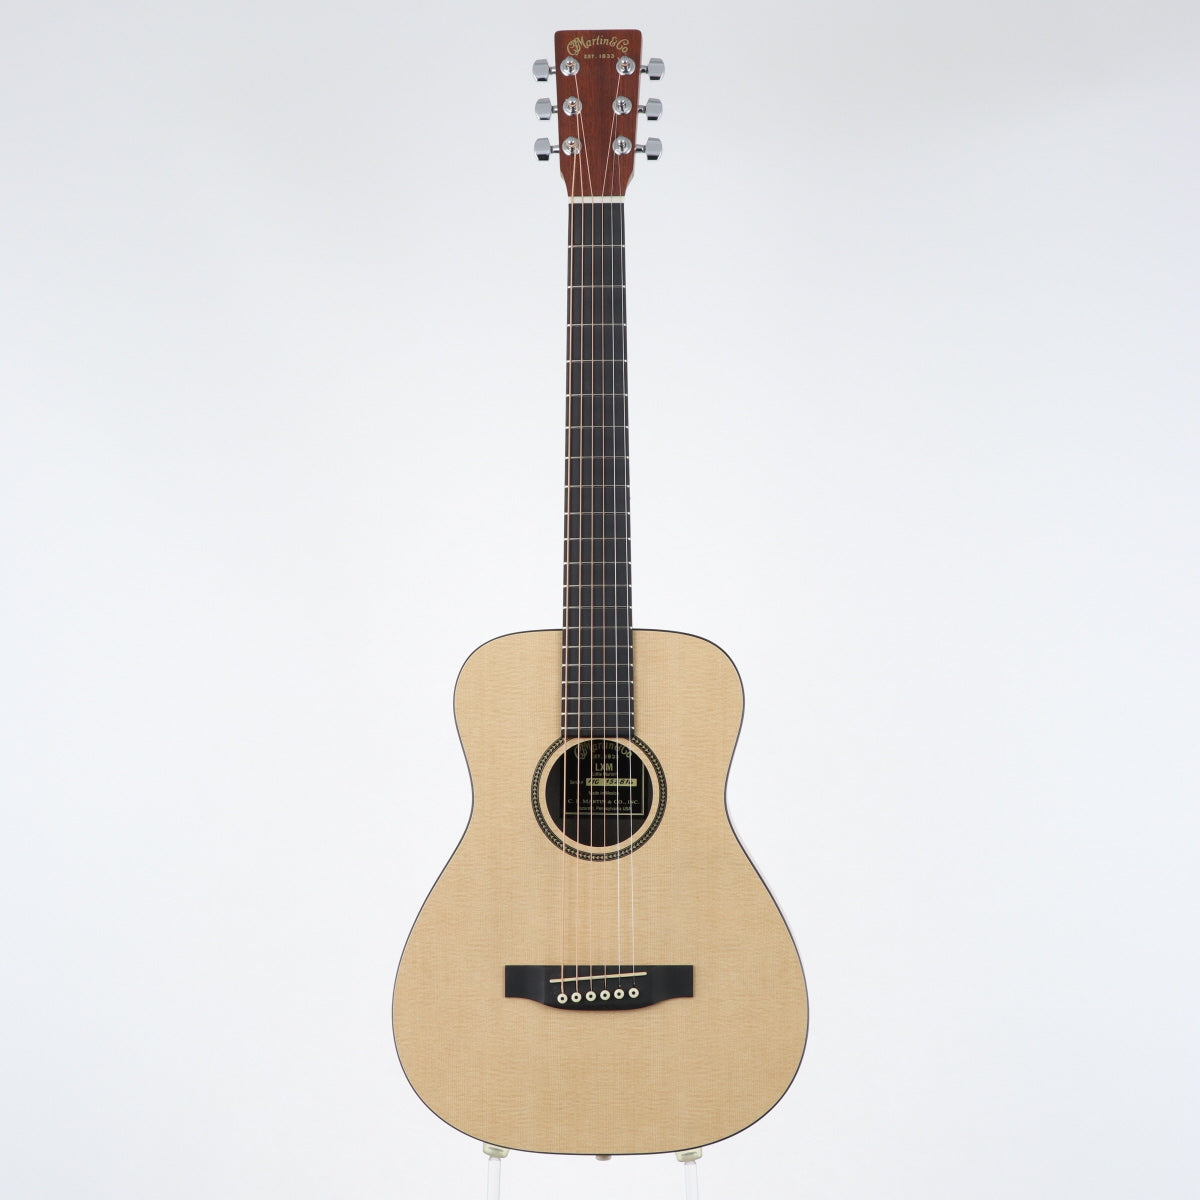 [SN MG  152816] USED MARTIN / LXM/LITTLE MARTIN NATURAL [12]